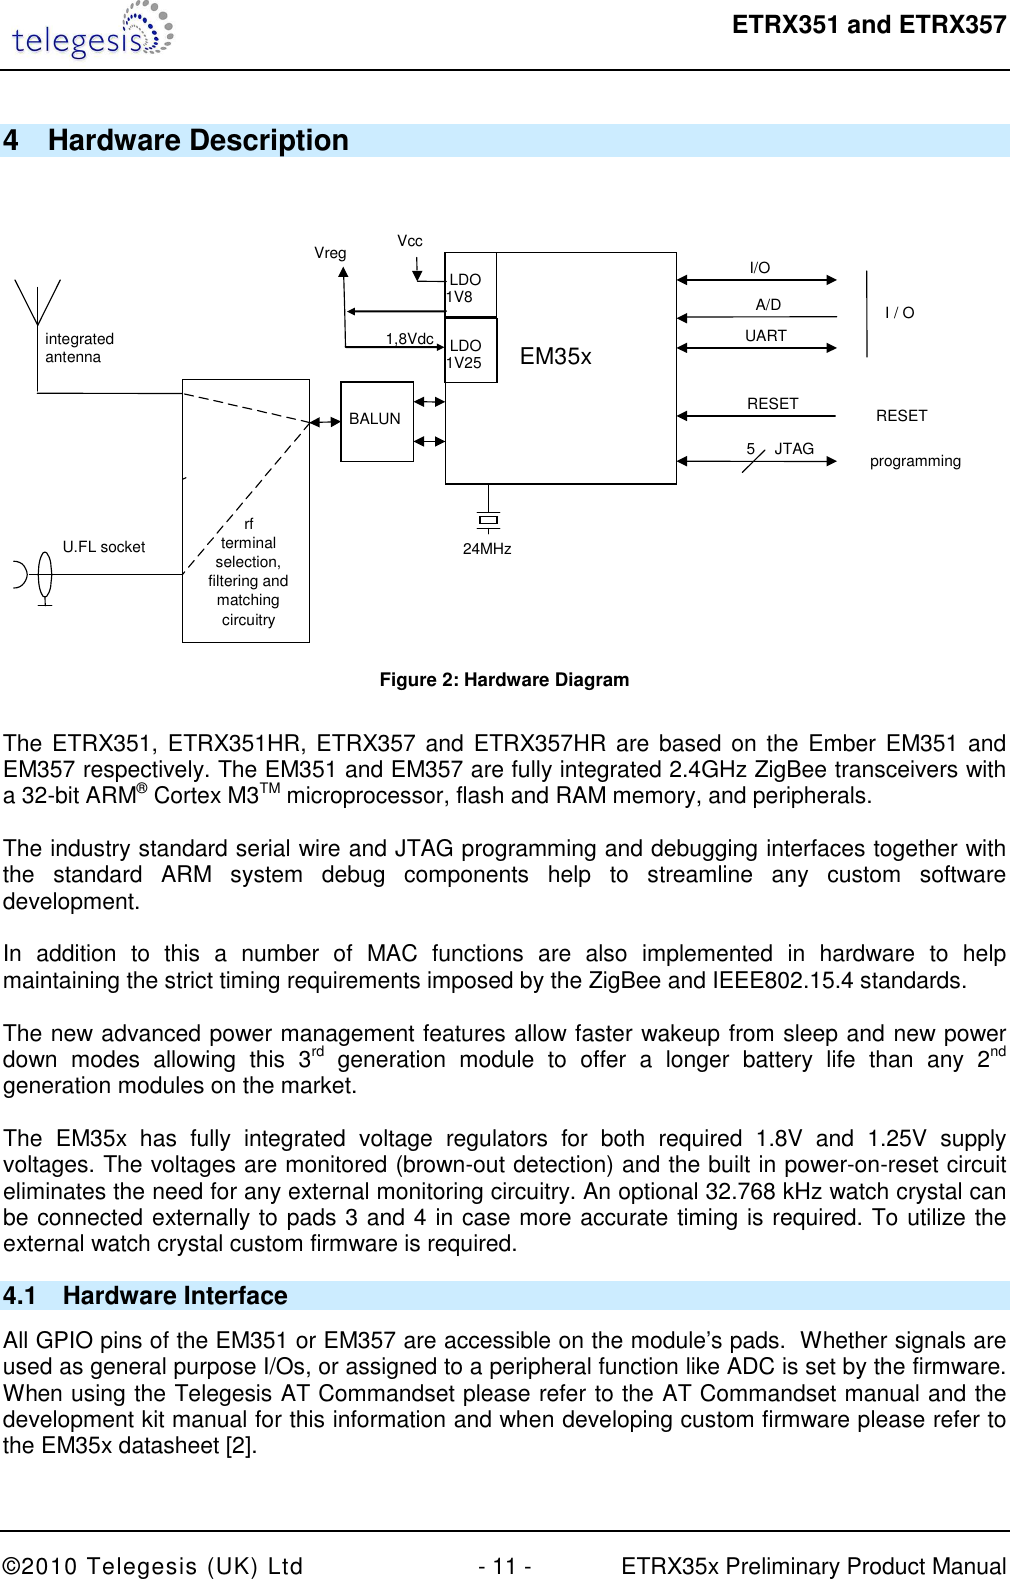  ETRX351 and ETRX357  ©2010 Telegesis (UK) Ltd  - 11 -  ETRX35x Preliminary Product Manual 4  Hardware Description    24MHz EM35x I/O UART I / O programming 5 JTAG Vcc Vreg RESET RESET BALUN integrated antenna U.FL socket rf terminal selection, filtering and matching circuitry    LDO 1V8 1,8Vdc A/D    LDO 1V25  Figure 2: Hardware Diagram  The ETRX351, ETRX351HR, ETRX357 and ETRX357HR are based on the Ember EM351 and EM357 respectively. The EM351 and EM357 are fully integrated 2.4GHz ZigBee transceivers with a 32-bit ARM® Cortex M3TM microprocessor, flash and RAM memory, and peripherals.  The industry standard serial wire and JTAG programming and debugging interfaces together with the  standard  ARM  system  debug  components  help  to  streamline  any  custom  software development.  In  addition  to  this  a  number  of  MAC  functions  are  also  implemented  in  hardware  to  help maintaining the strict timing requirements imposed by the ZigBee and IEEE802.15.4 standards.  The new advanced power management features allow faster wakeup from sleep and new power down  modes  allowing  this  3rd  generation  module  to  offer  a  longer  battery  life  than  any  2nd generation modules on the market.  The  EM35x  has  fully  integrated  voltage  regulators  for  both  required  1.8V  and  1.25V  supply voltages. The voltages are monitored (brown-out detection) and the built in power-on-reset circuit eliminates the need for any external monitoring circuitry. An optional 32.768 kHz watch crystal can be connected externally to pads 3 and 4 in case more accurate timing is required. To utilize the external watch crystal custom firmware is required. 4.1  Hardware Interface All GPIO pins of the EM351 or EM357 are accessible on the module’s pads.  Whether signals are used as general purpose I/Os, or assigned to a peripheral function like ADC is set by the firmware. When using the Telegesis AT Commandset please refer to the AT Commandset manual and the development kit manual for this information and when developing custom firmware please refer to the EM35x datasheet [2]. 